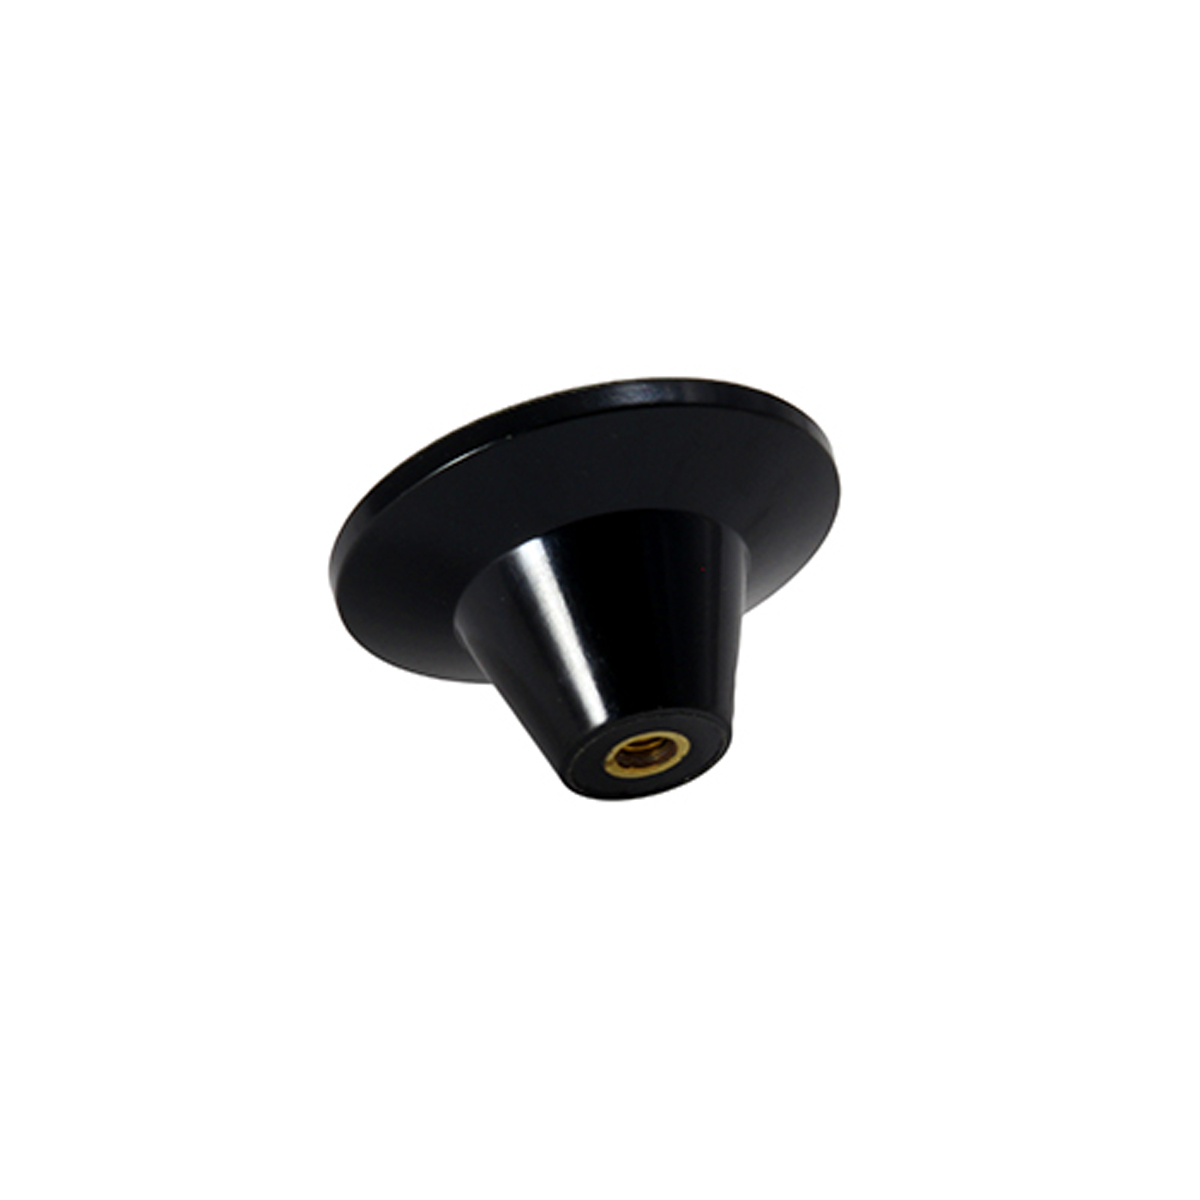 Hobart 290885 Equivalent Switch Knob for Band Saws